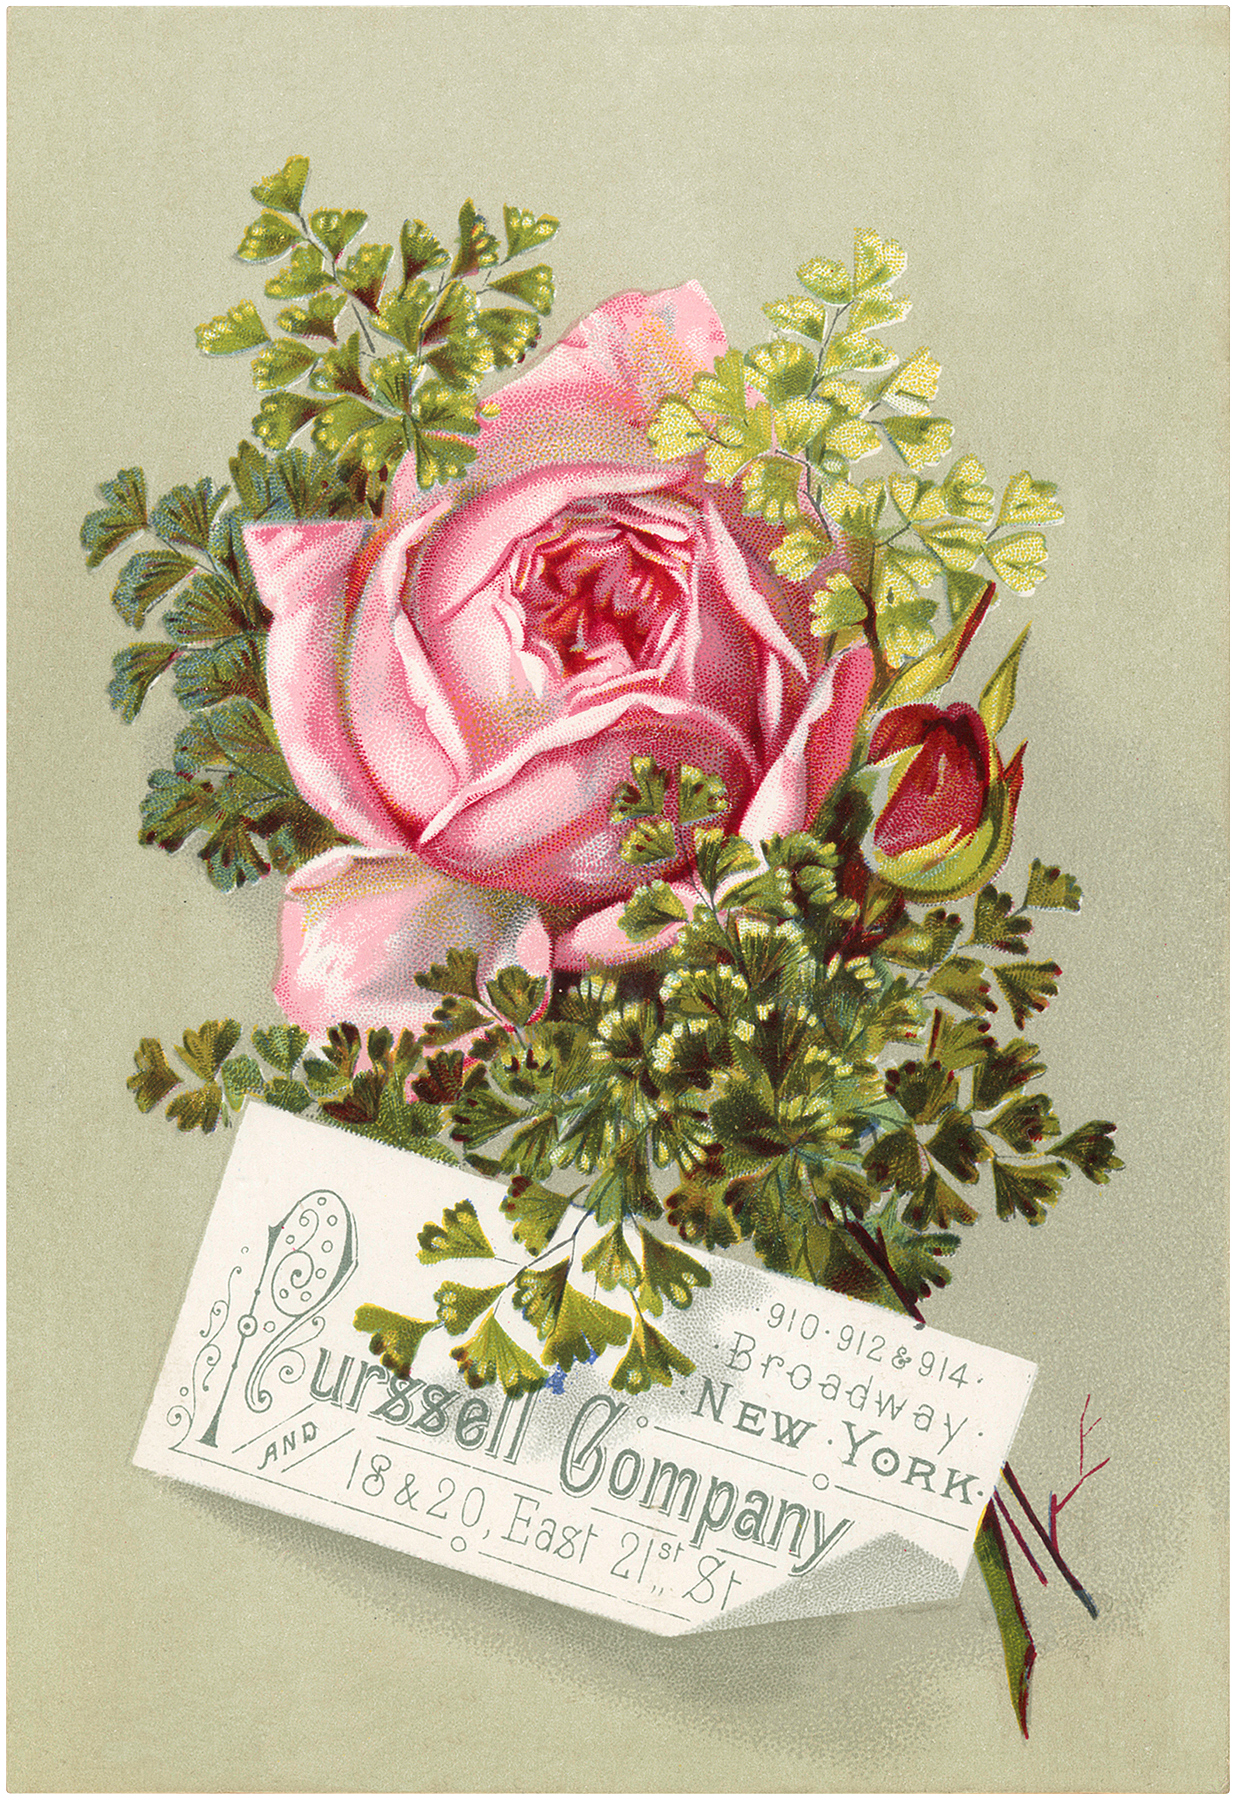 Beautiful Vintage Pink Rose Image! - The Graphics Fairy1235 x 1800